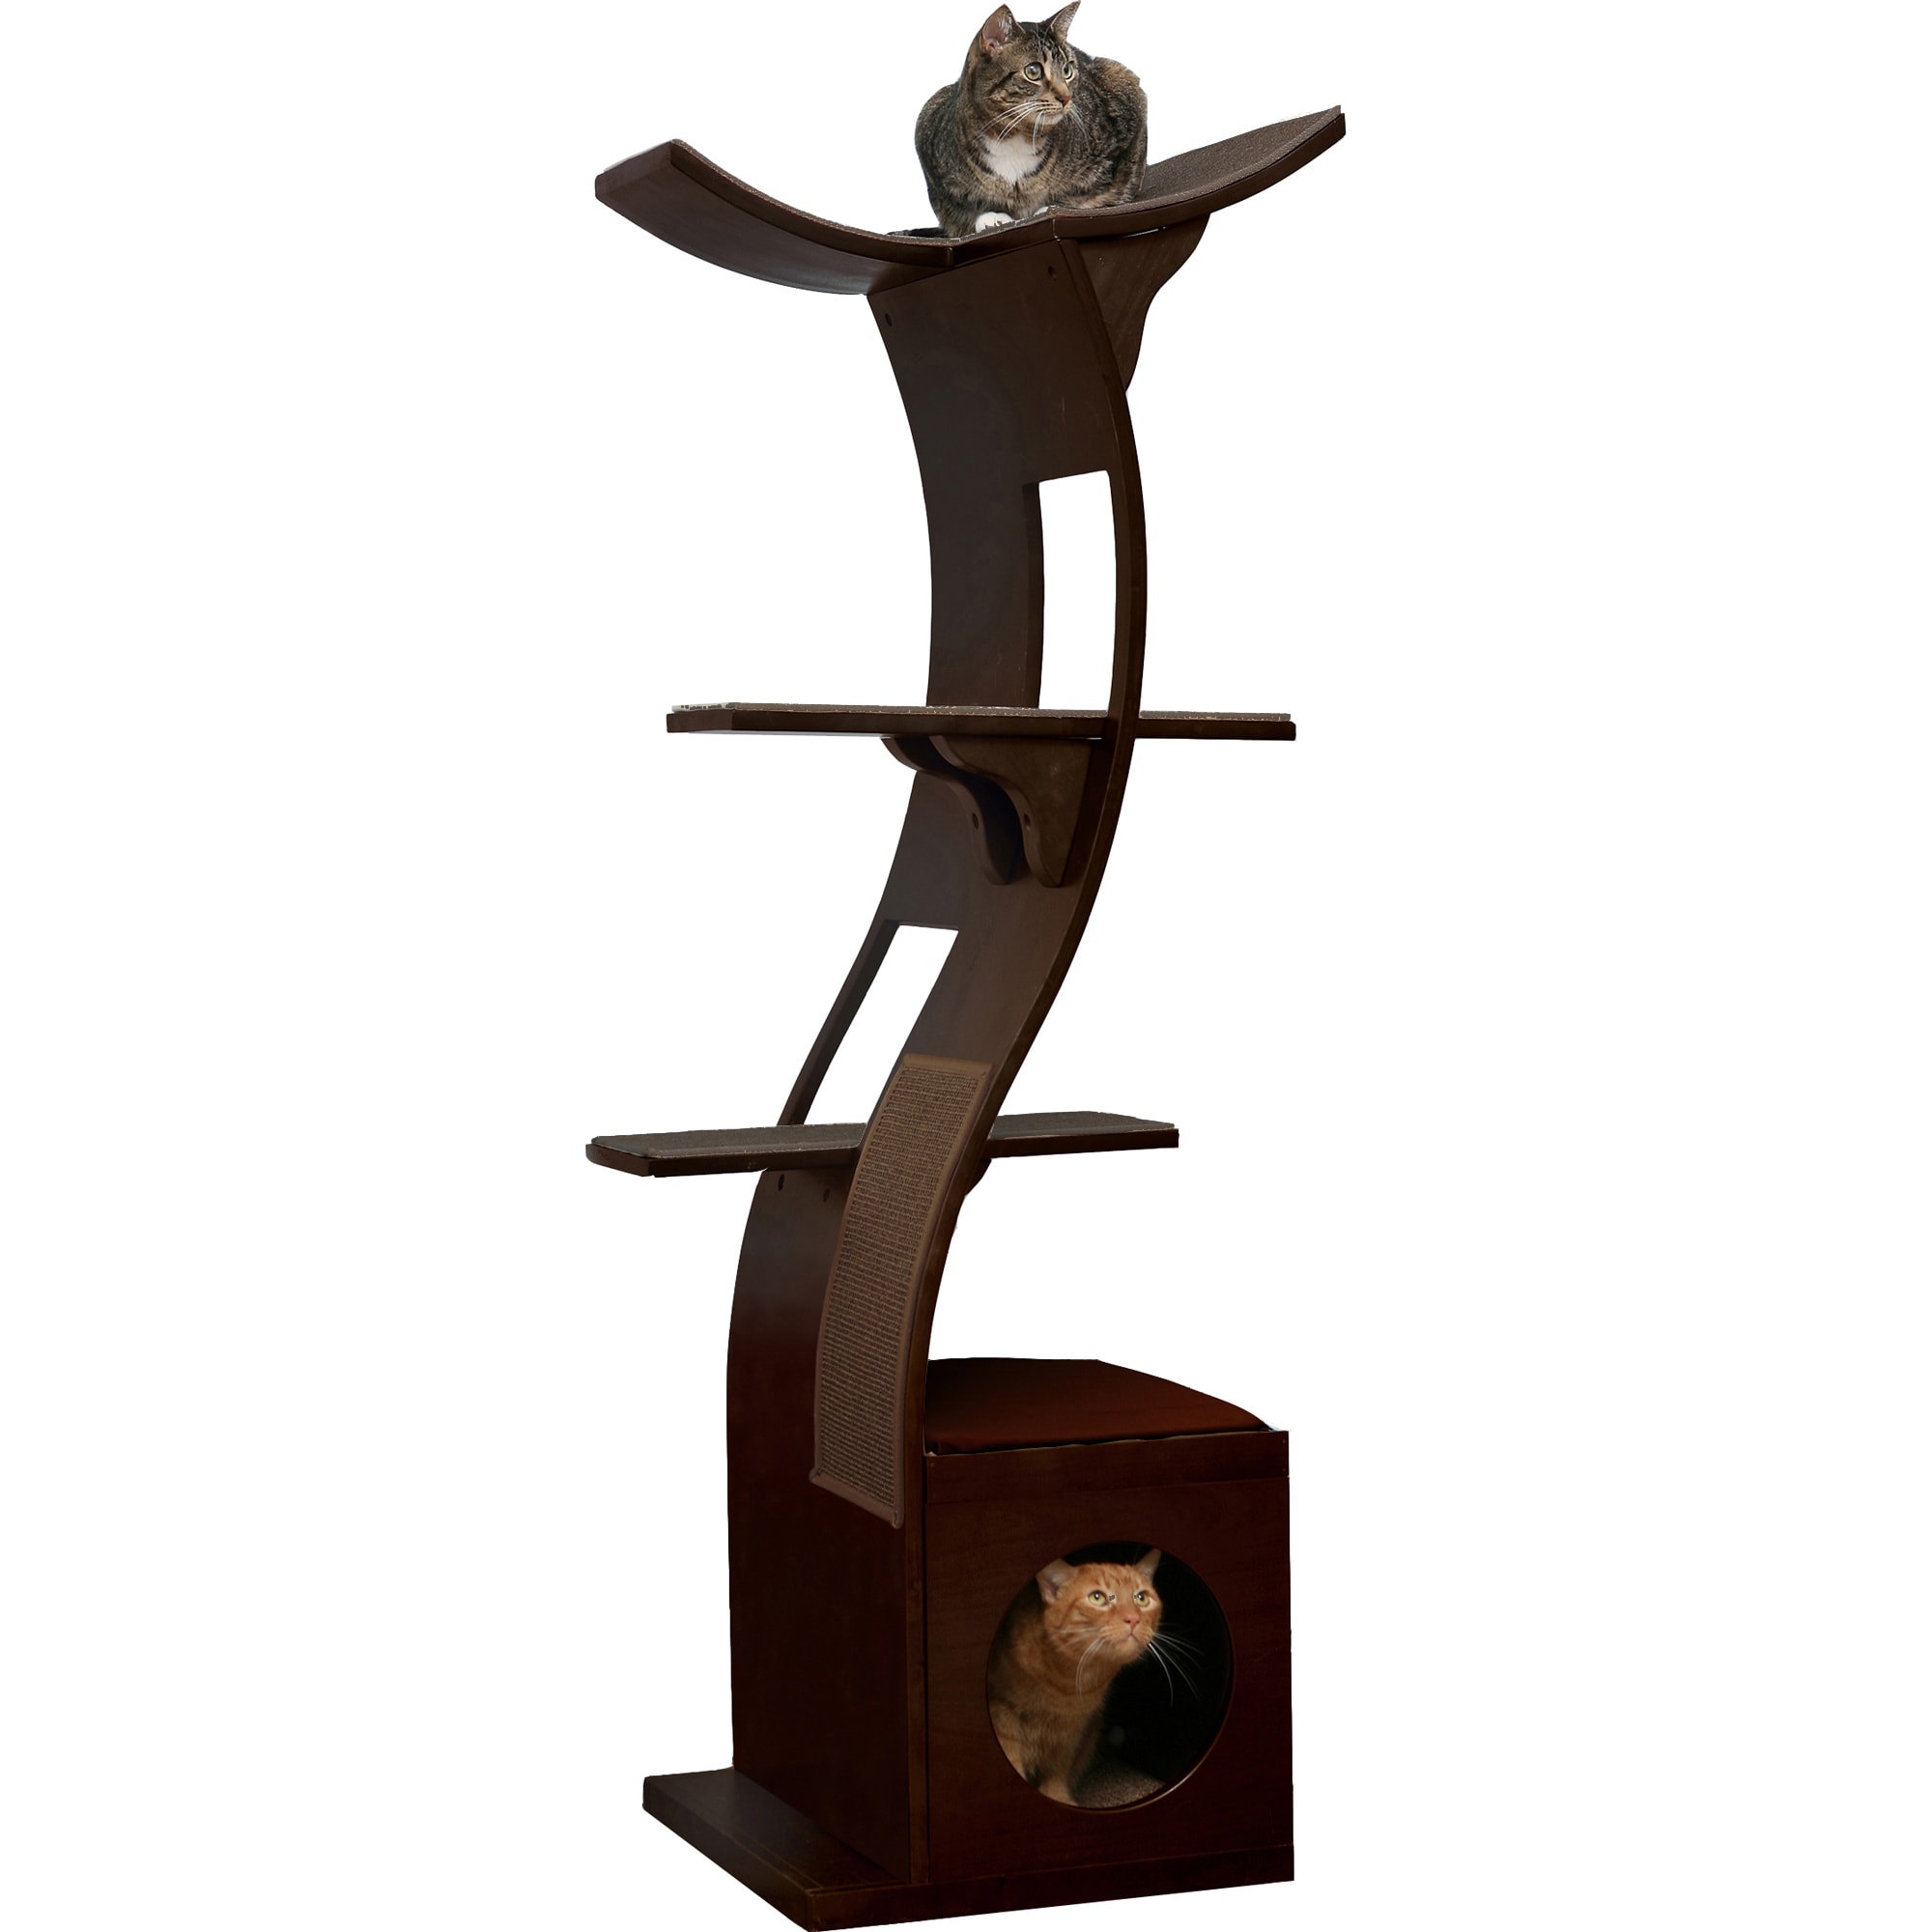 Photos - Other for Cats The Refined Feline The Refined Feline Lotus Tower Cat Tree in Espresso, 69